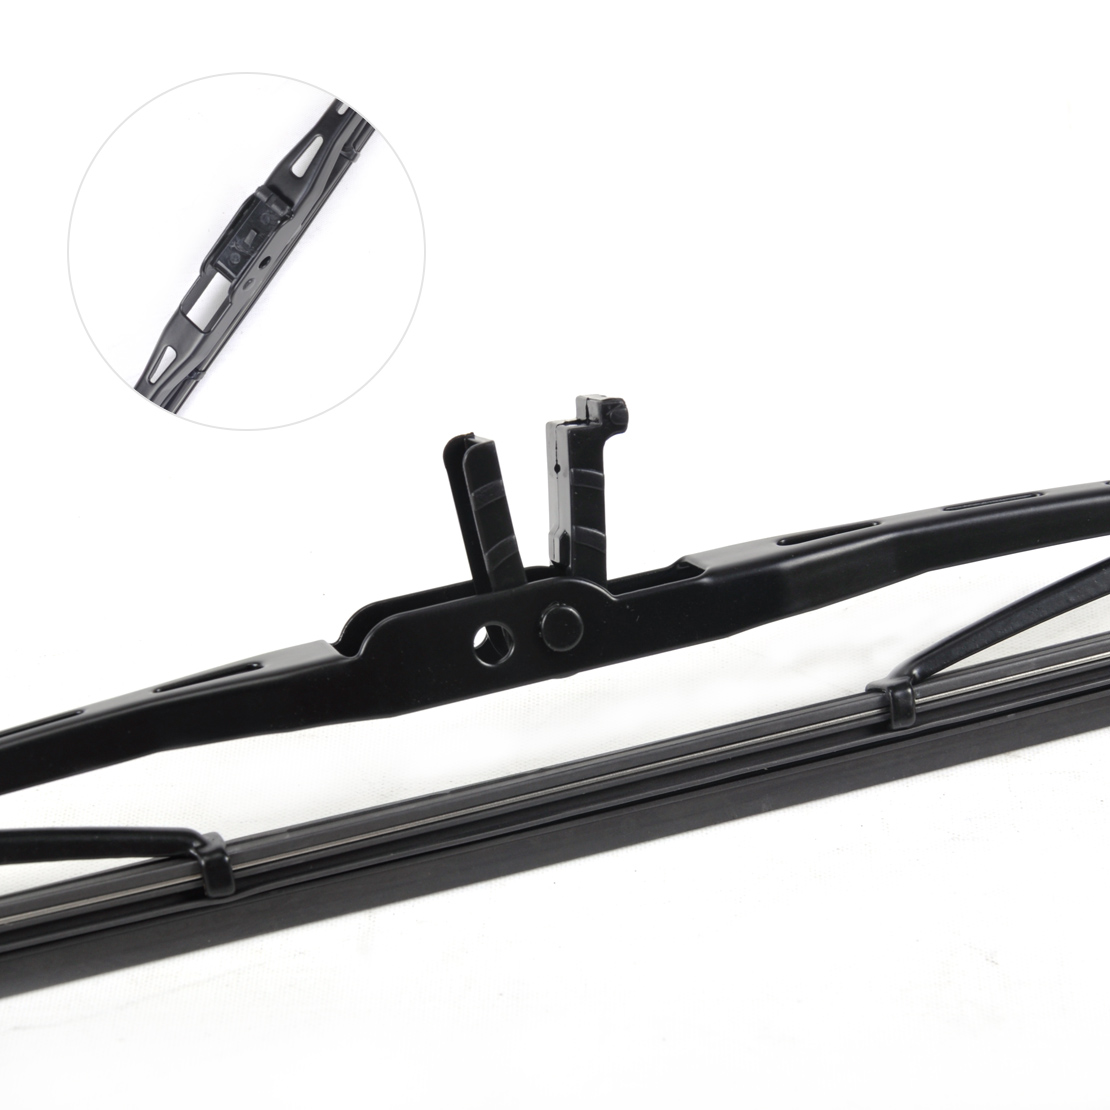 For Land Rover Range Rover Sport 2006-2011 Rear Window Windshield Wiper Blade | eBay 2006 Range Rover Sport Wiper Blades Size